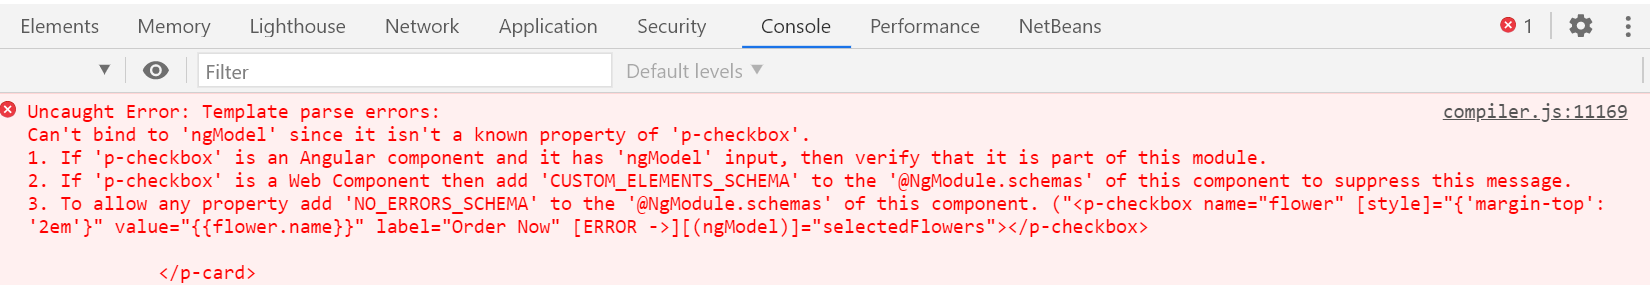 can't bind to 'ngmodel' since it isn't a known property of 'p-checkbox'.